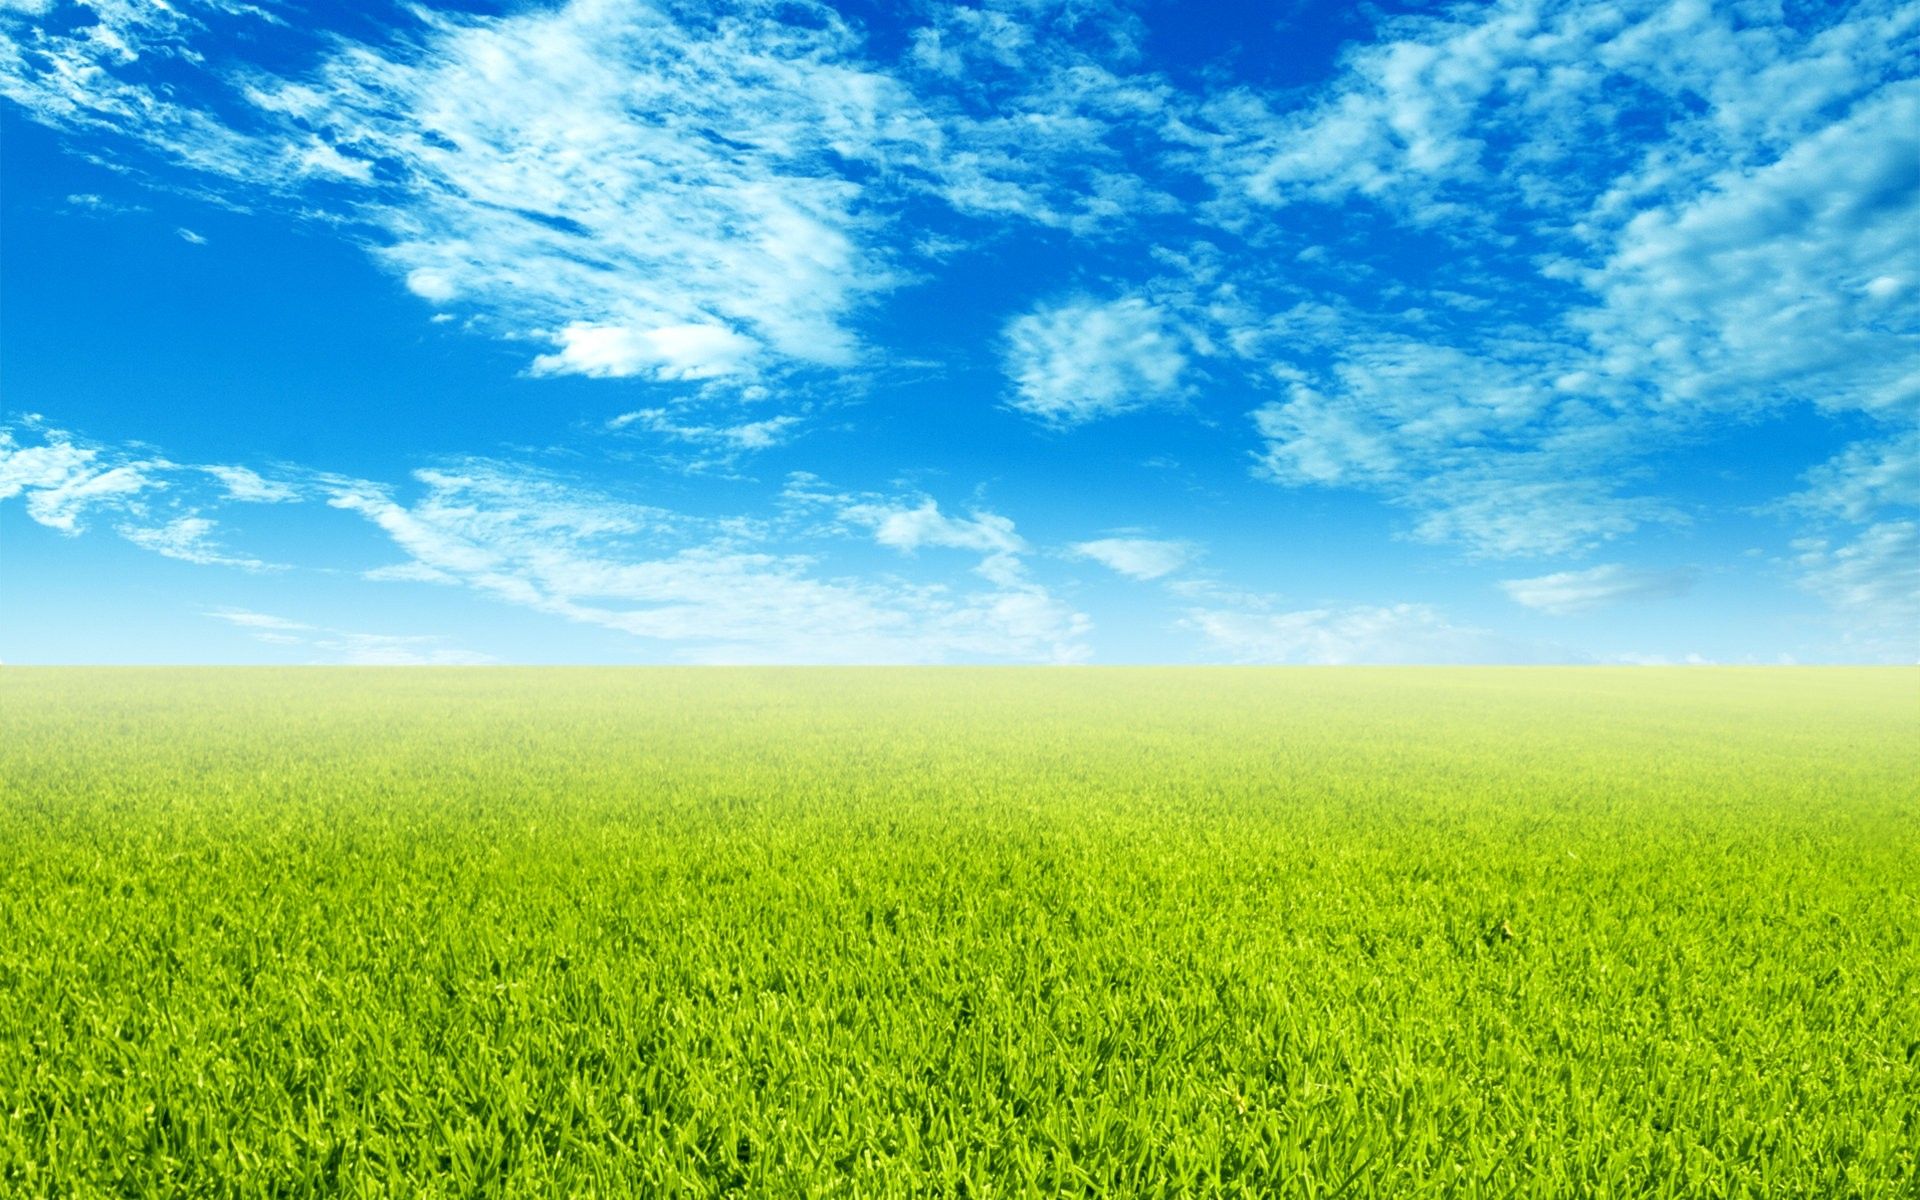 Sky and Grass Wallpaper Free Sky and Grass Background